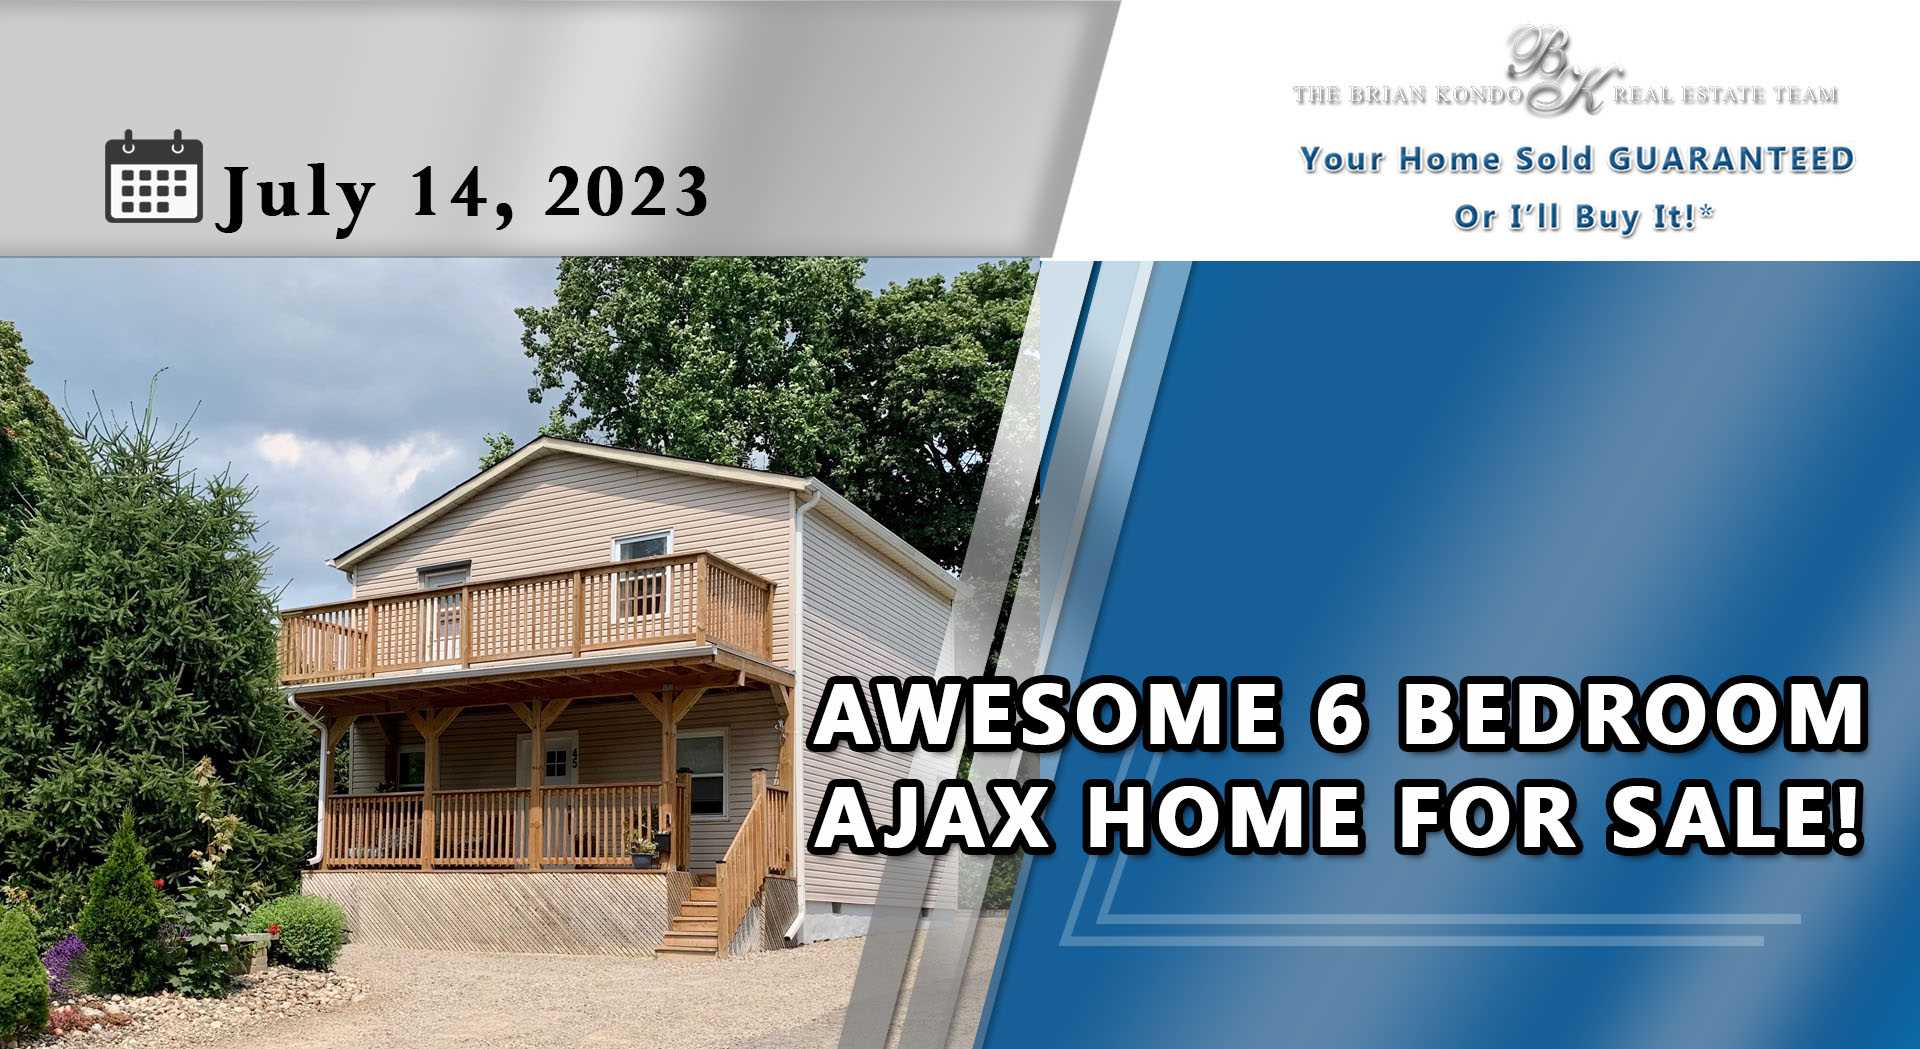 AWESOME 6 BEDROOM AJAX HOME FOR SALE! | The Brian Kondo Real Estate Team